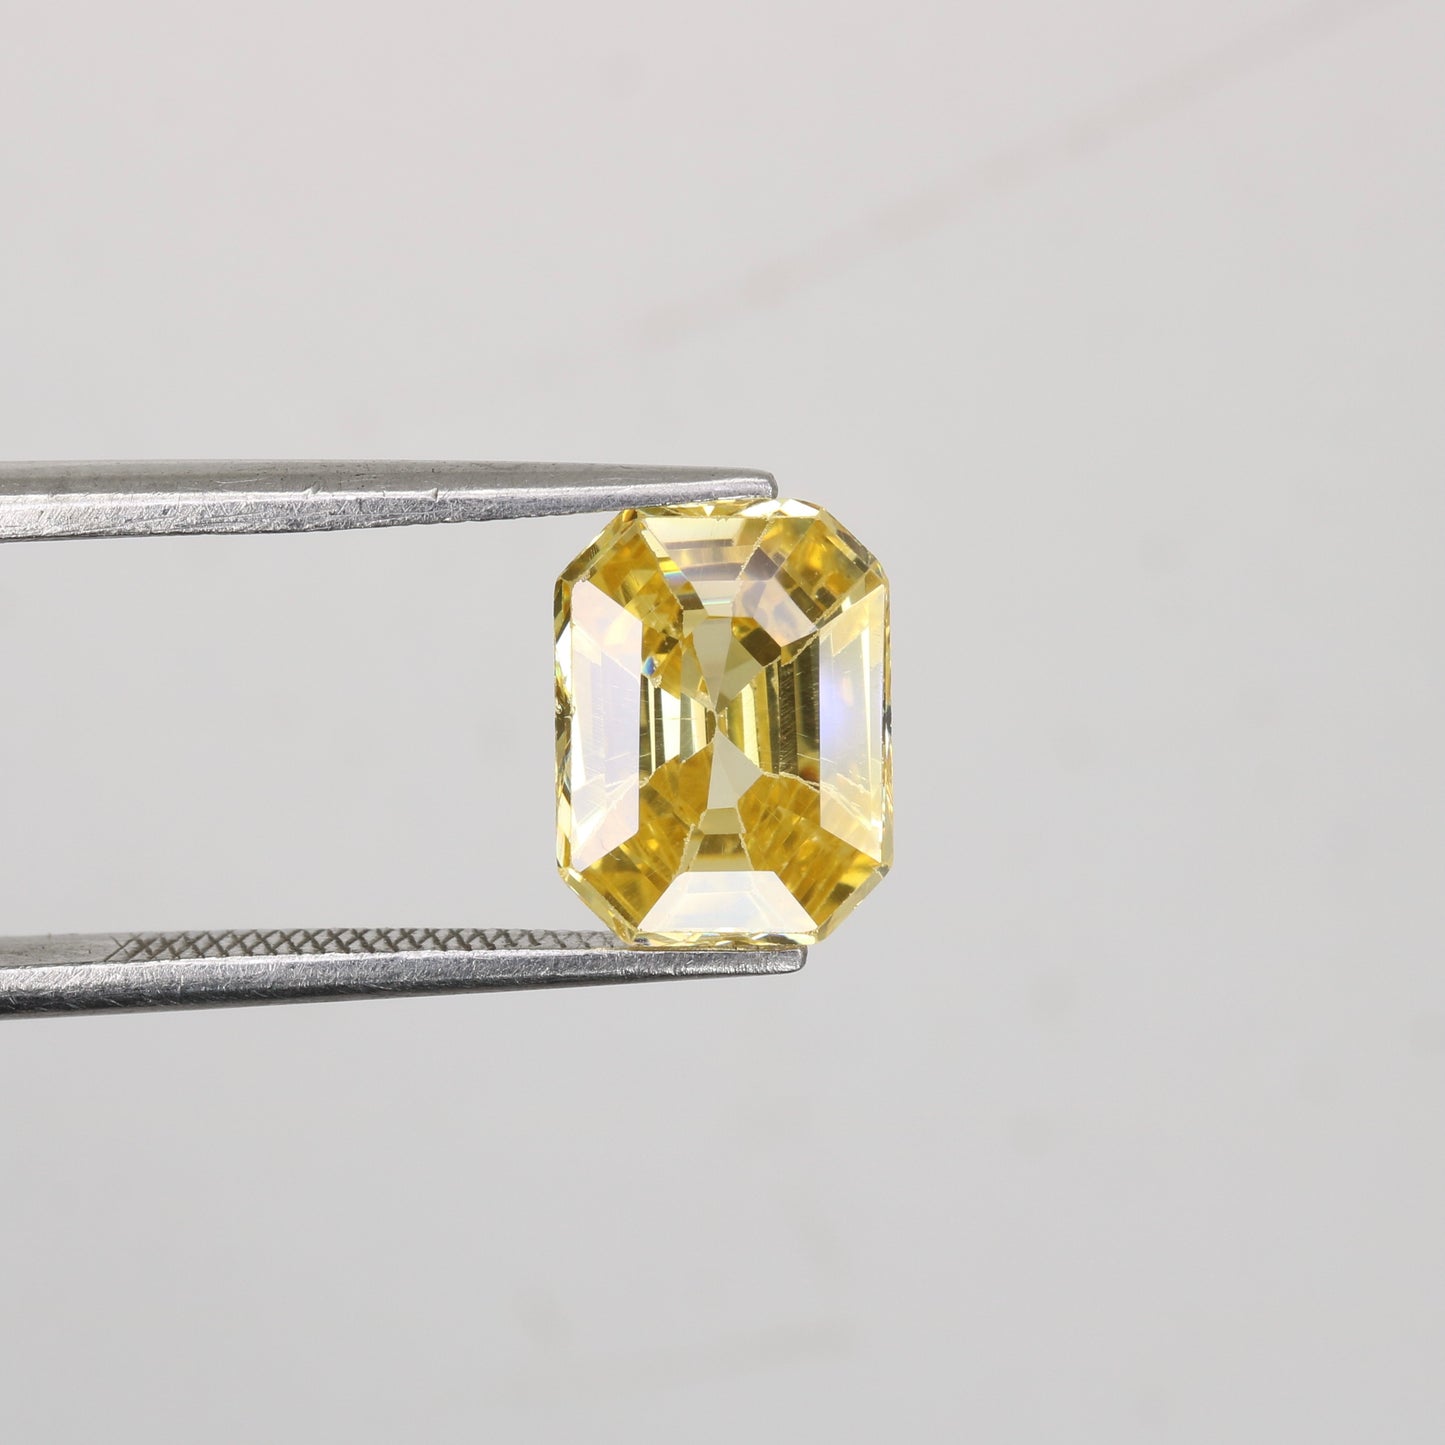 4.21 CT 7.00 MM Natural Yellow Citrine Emerald Shape Gemstone For Wedding Ring